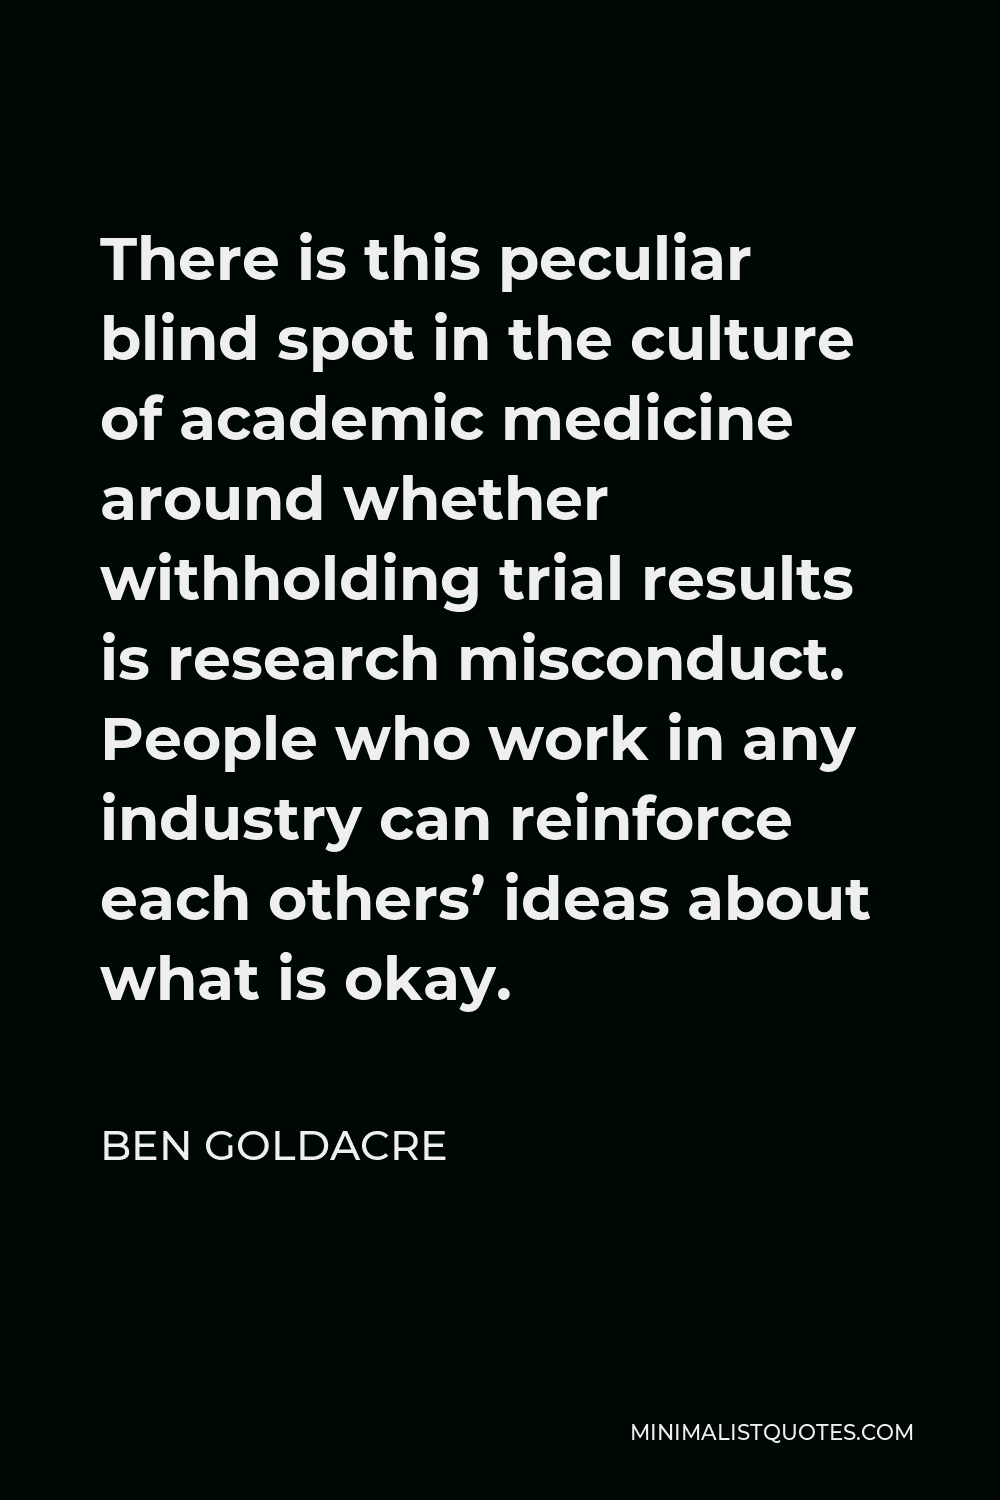 Ben Goldacre Quote - There is this peculiar blind spot in the culture of academic medicine around whether withholding trial results is research misconduct. People who work in any industry can reinforce each others’ ideas about what is okay.